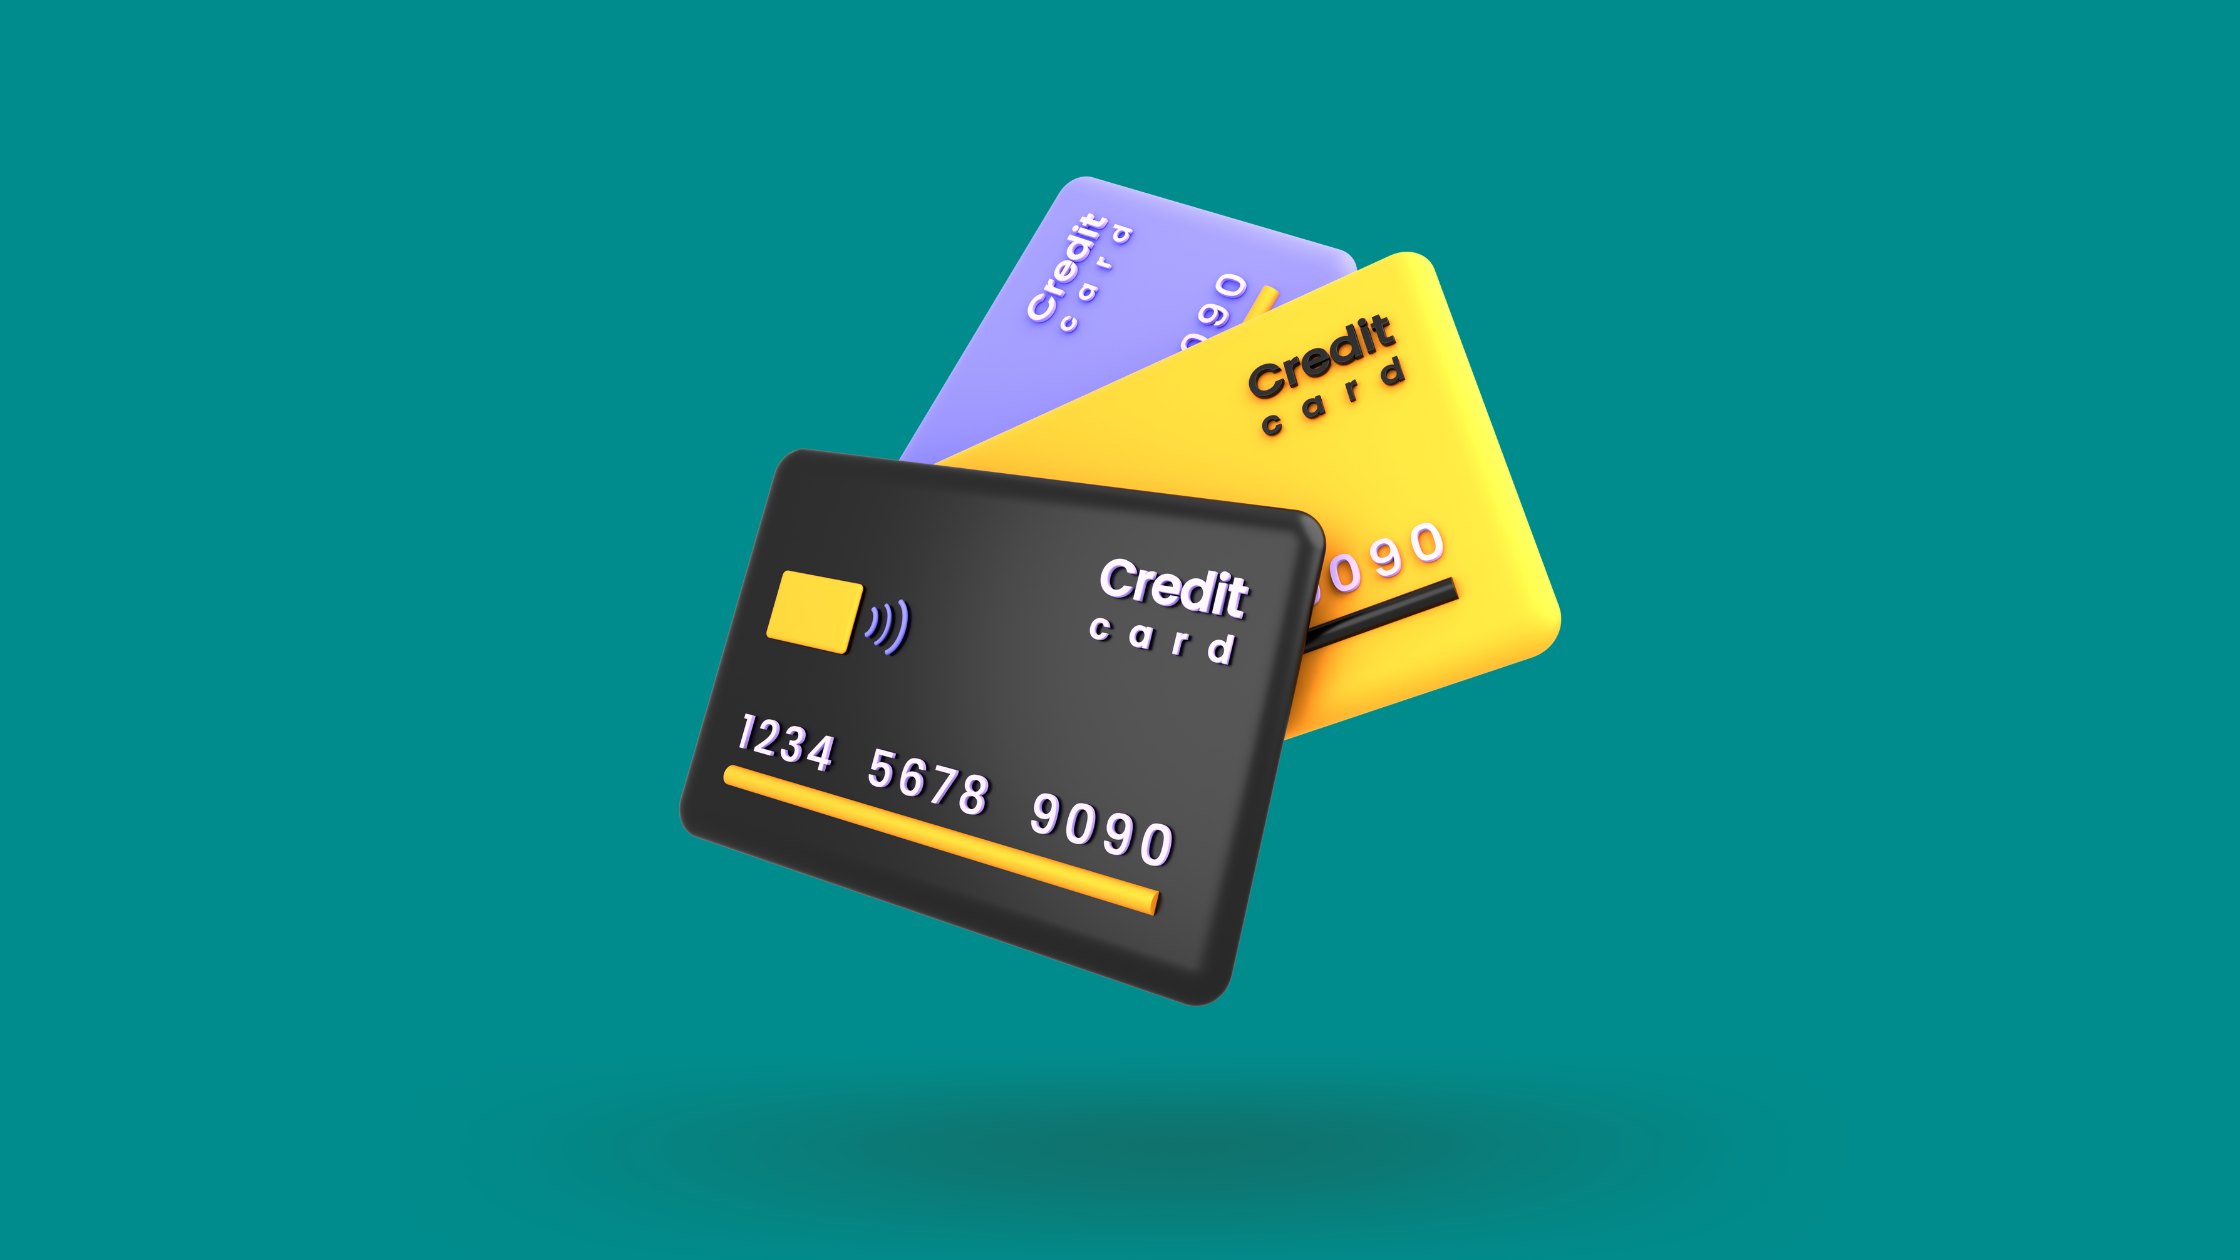 Bitcoin credit card payment sports betting tips and tricks